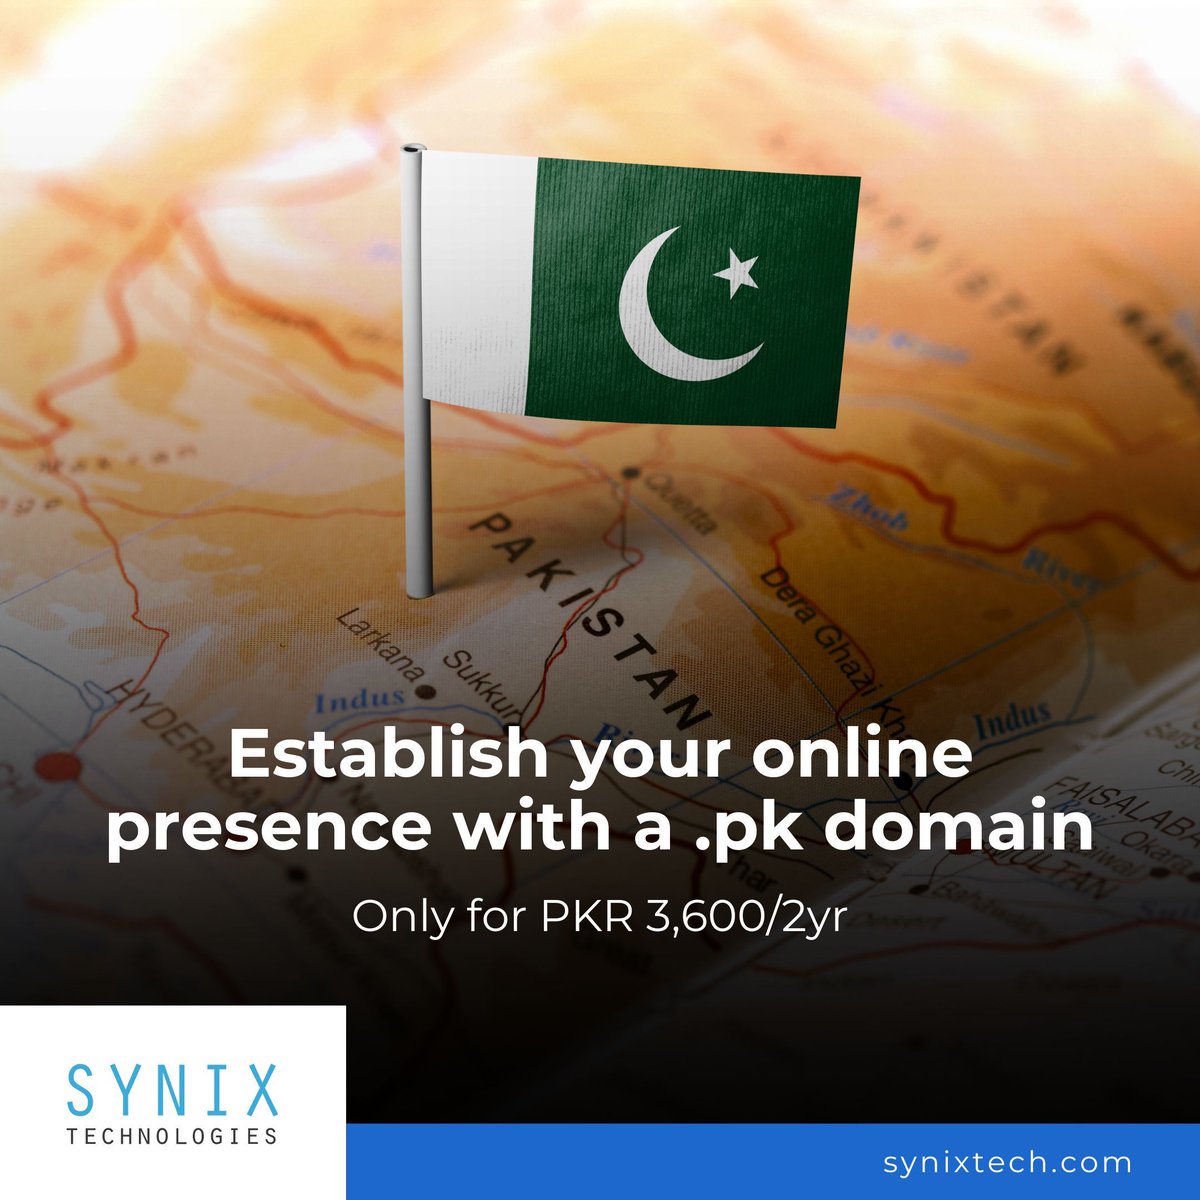 Your dream .PK domain is just a click away! Register with #SynixTech and take the first step towards your online presence in #Pakistan.

Place your order now: bit.ly/pkdomain-synix…

#PKDomain #DomainRegistration